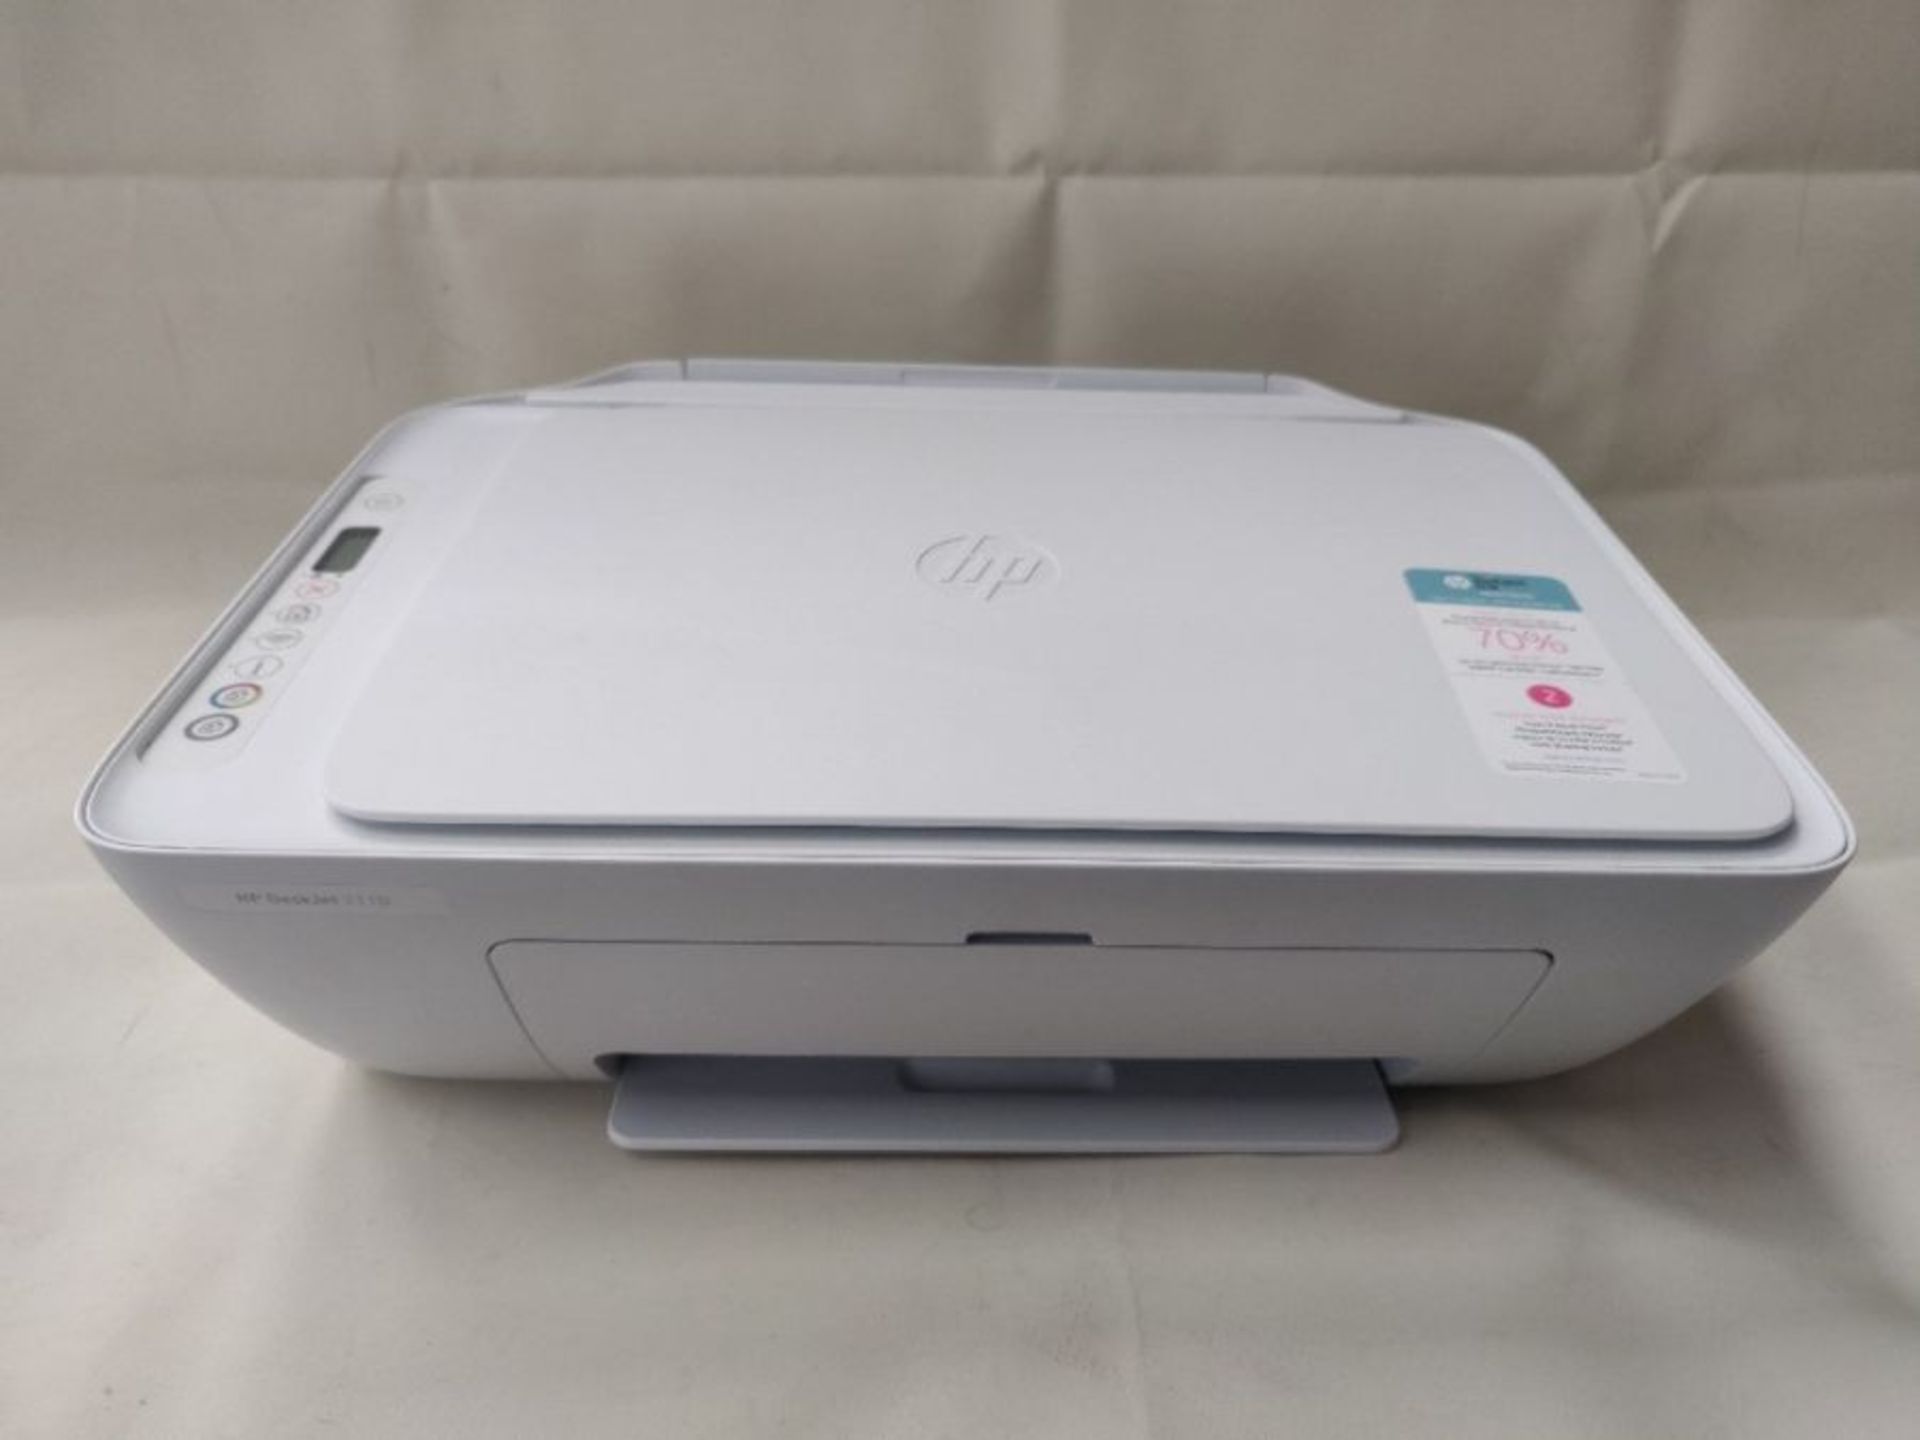 HP 5AR83B DeskJet 2710 All-in-One Printer with Wireless Printing, Instant Ink with 2 M - Image 3 of 3